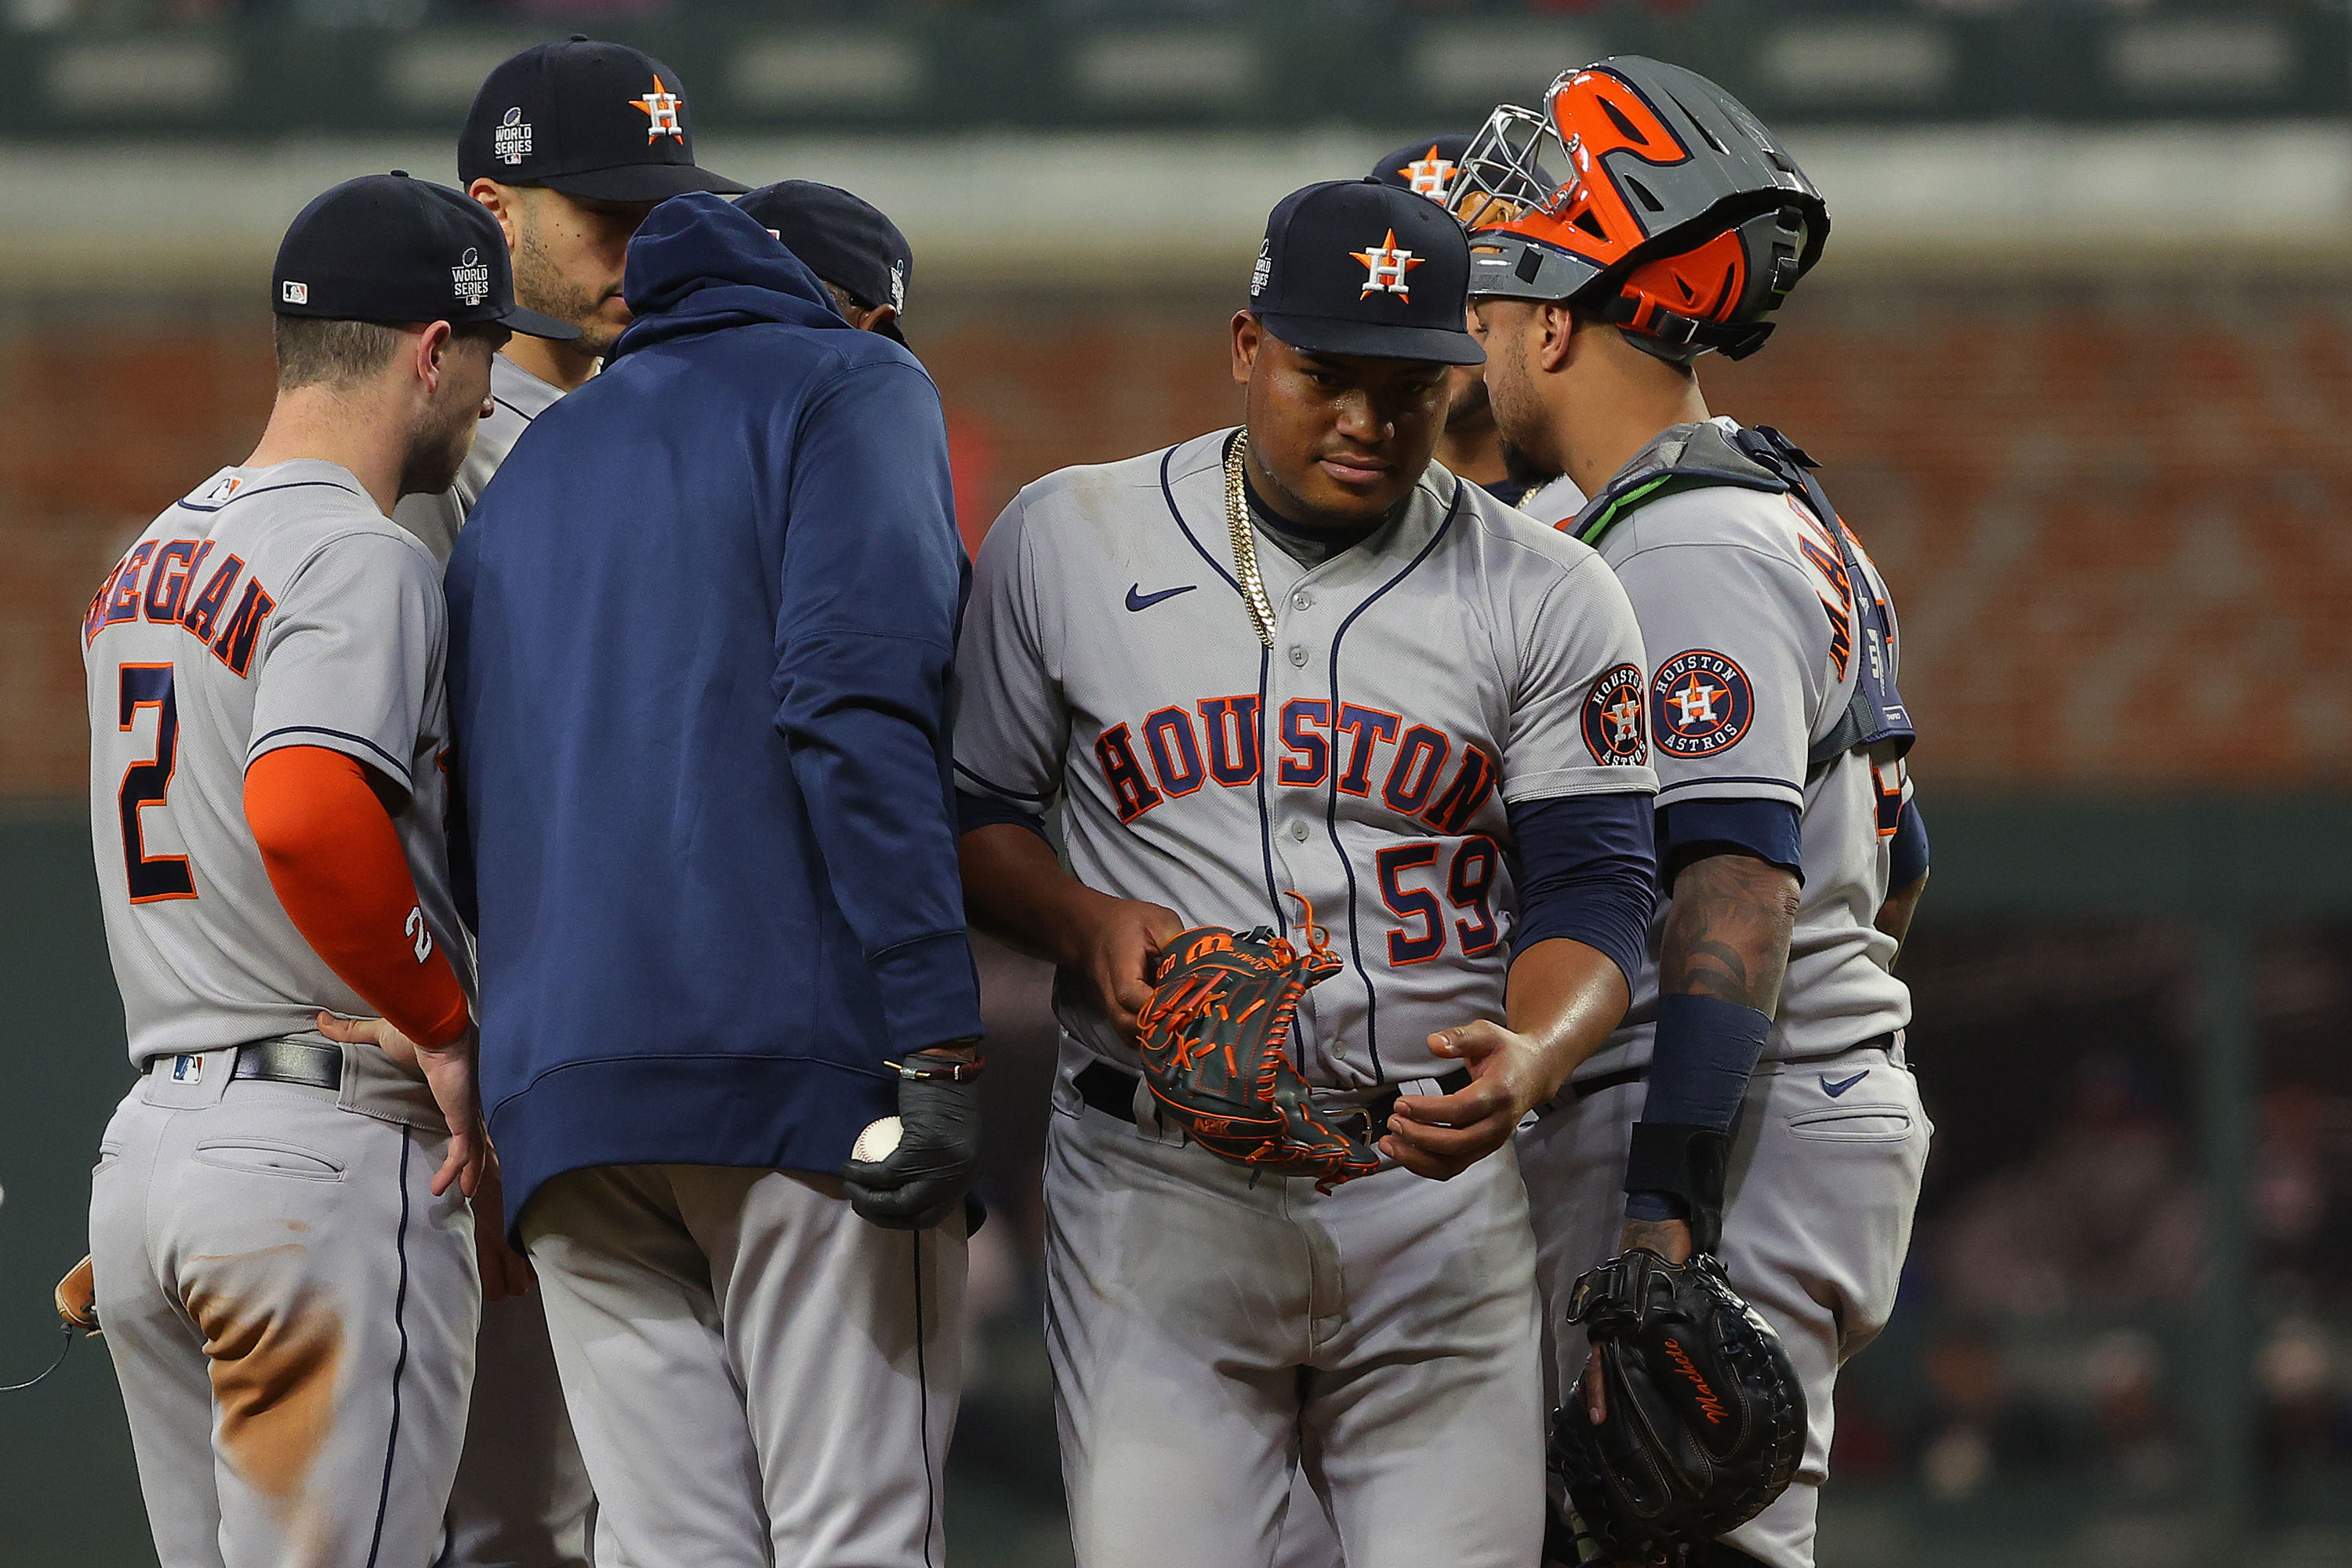 Framber Valdez #59 of the Astros is taken out of the game during the third inning.